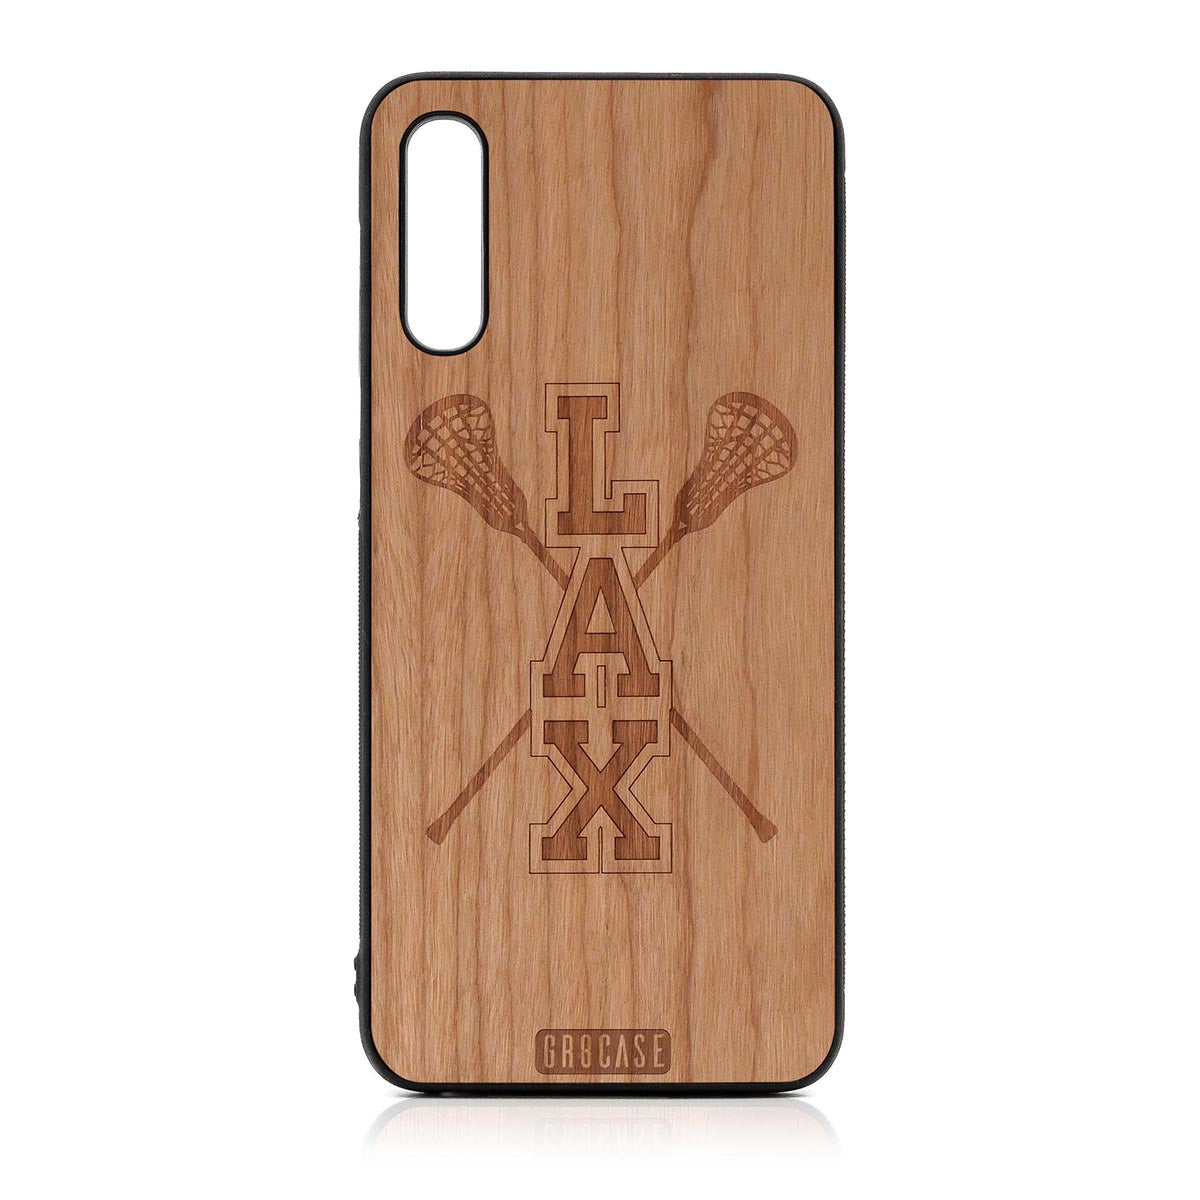 Lacrosse (LAX) Sticks Design Wood Case For Samsung Galaxy A50 by GR8CASE